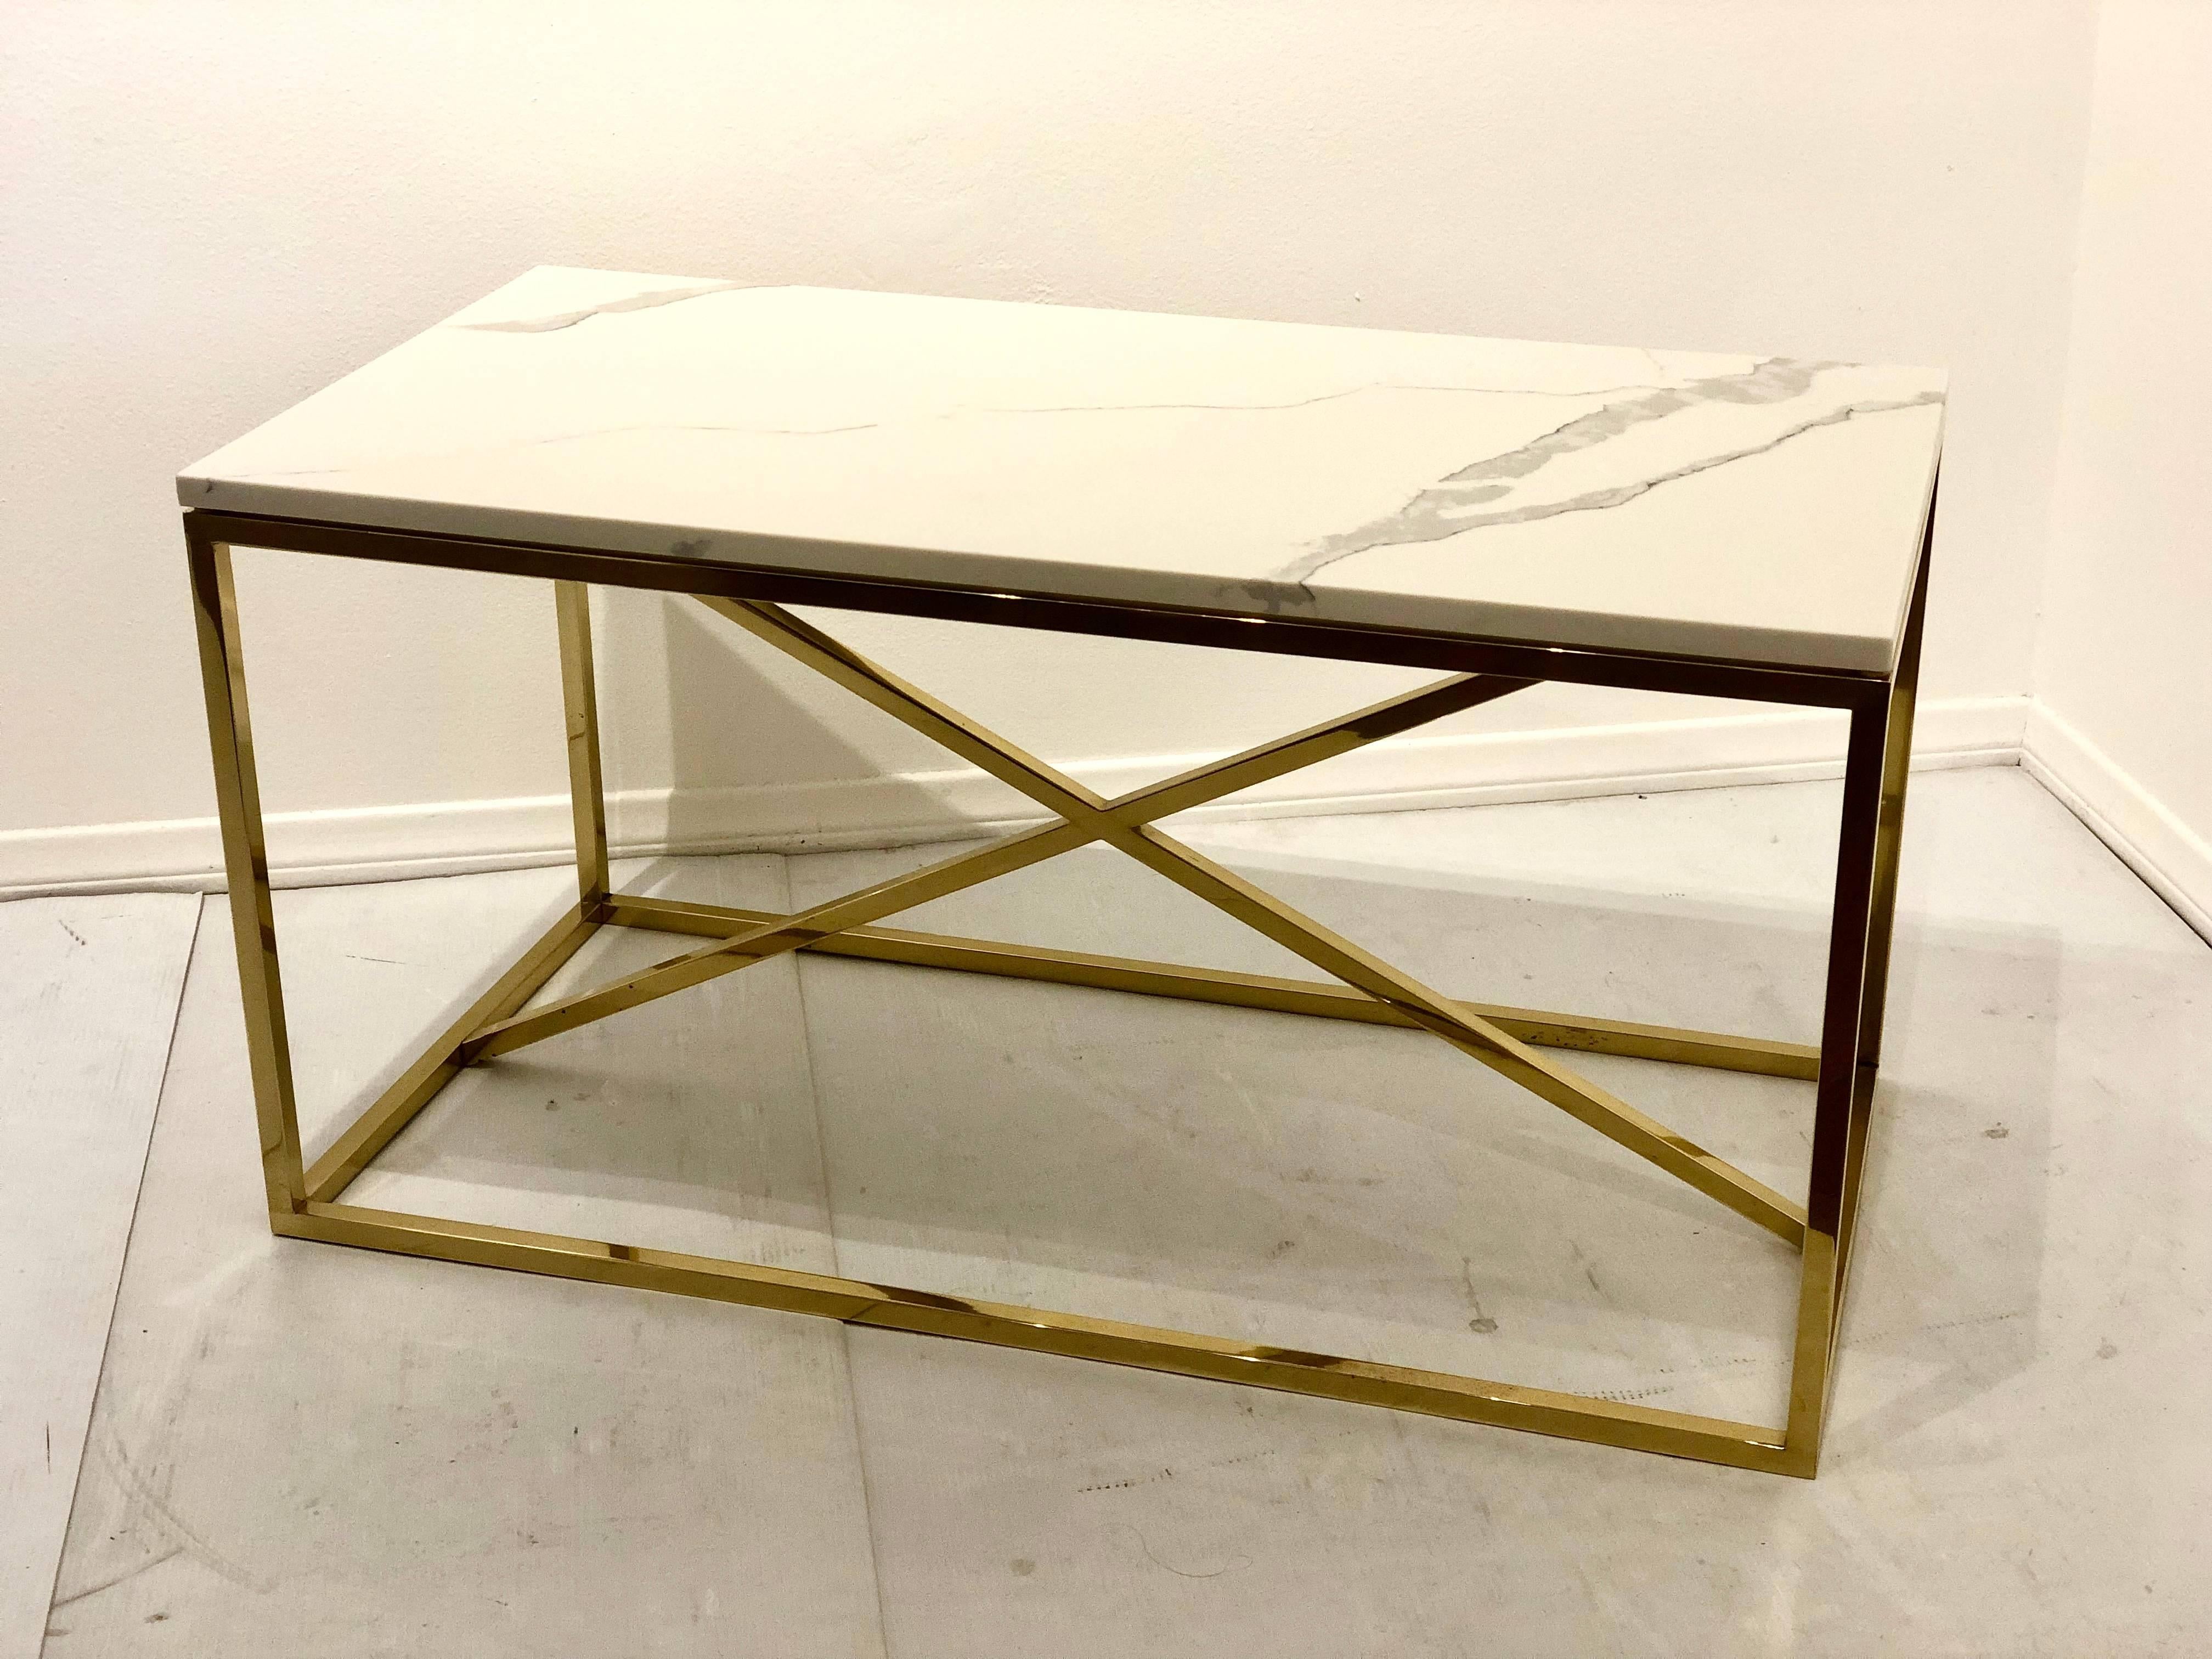 Striking Polished Brass and Marble Coffee Table x Base 2